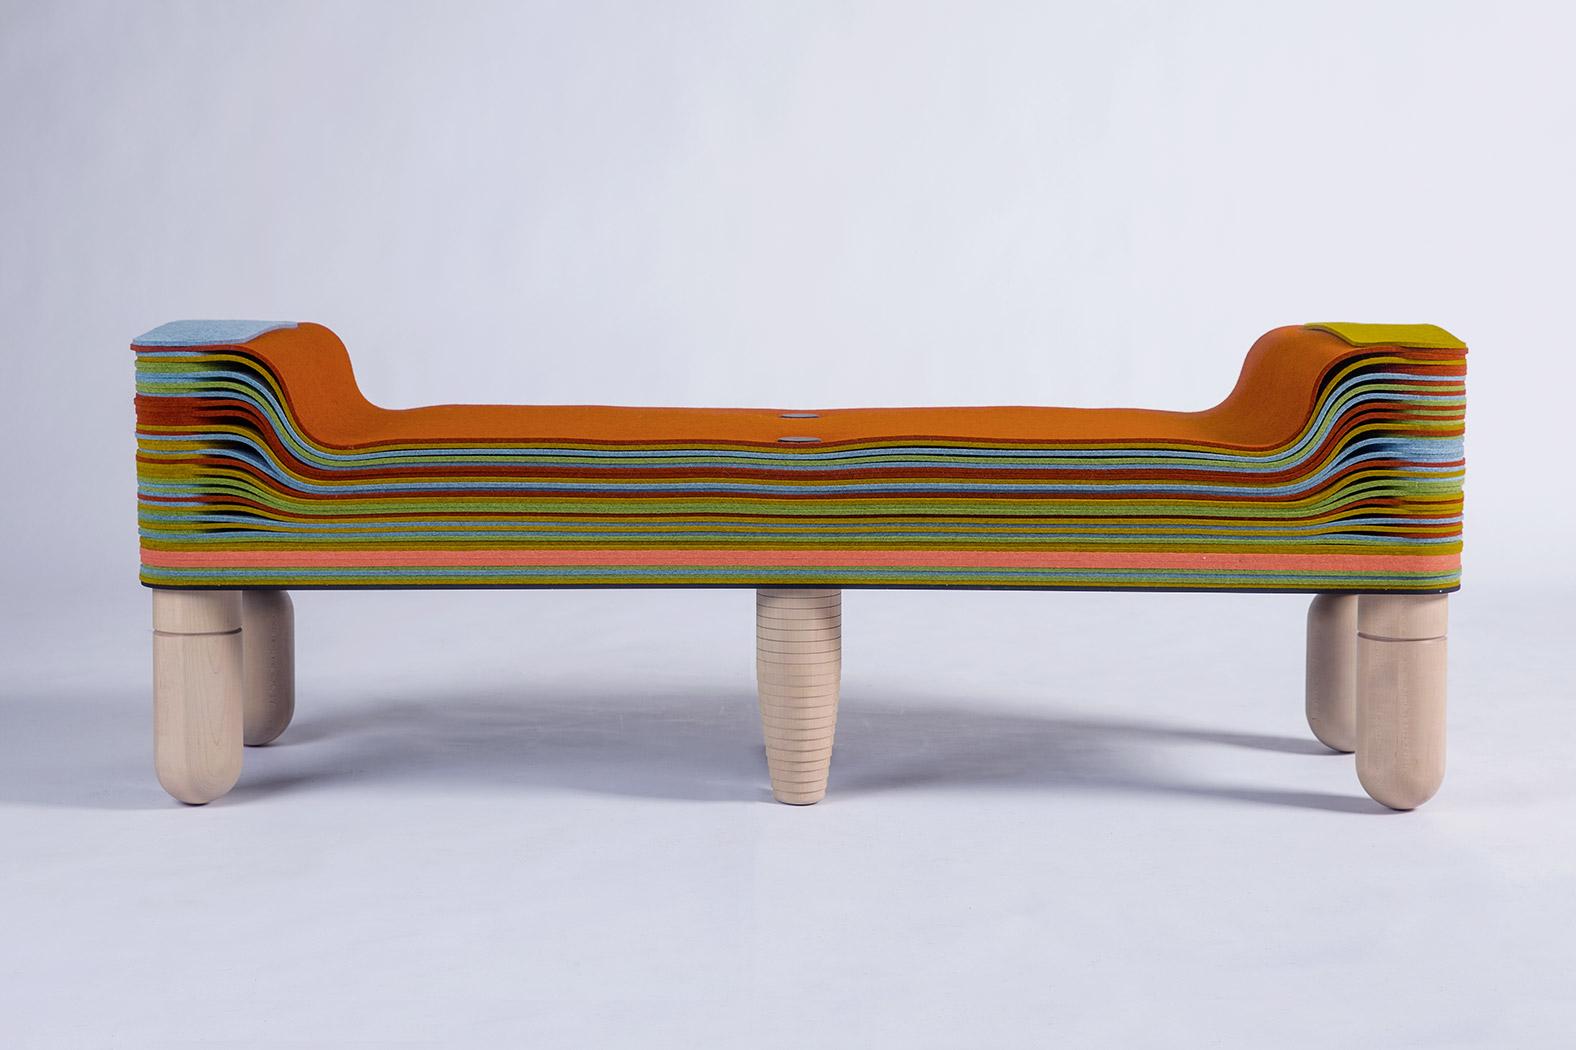 Maxine D, Felt and Wood Bench, Benoist F. Drut in STACKABL, Canada, 2021 For Sale 4